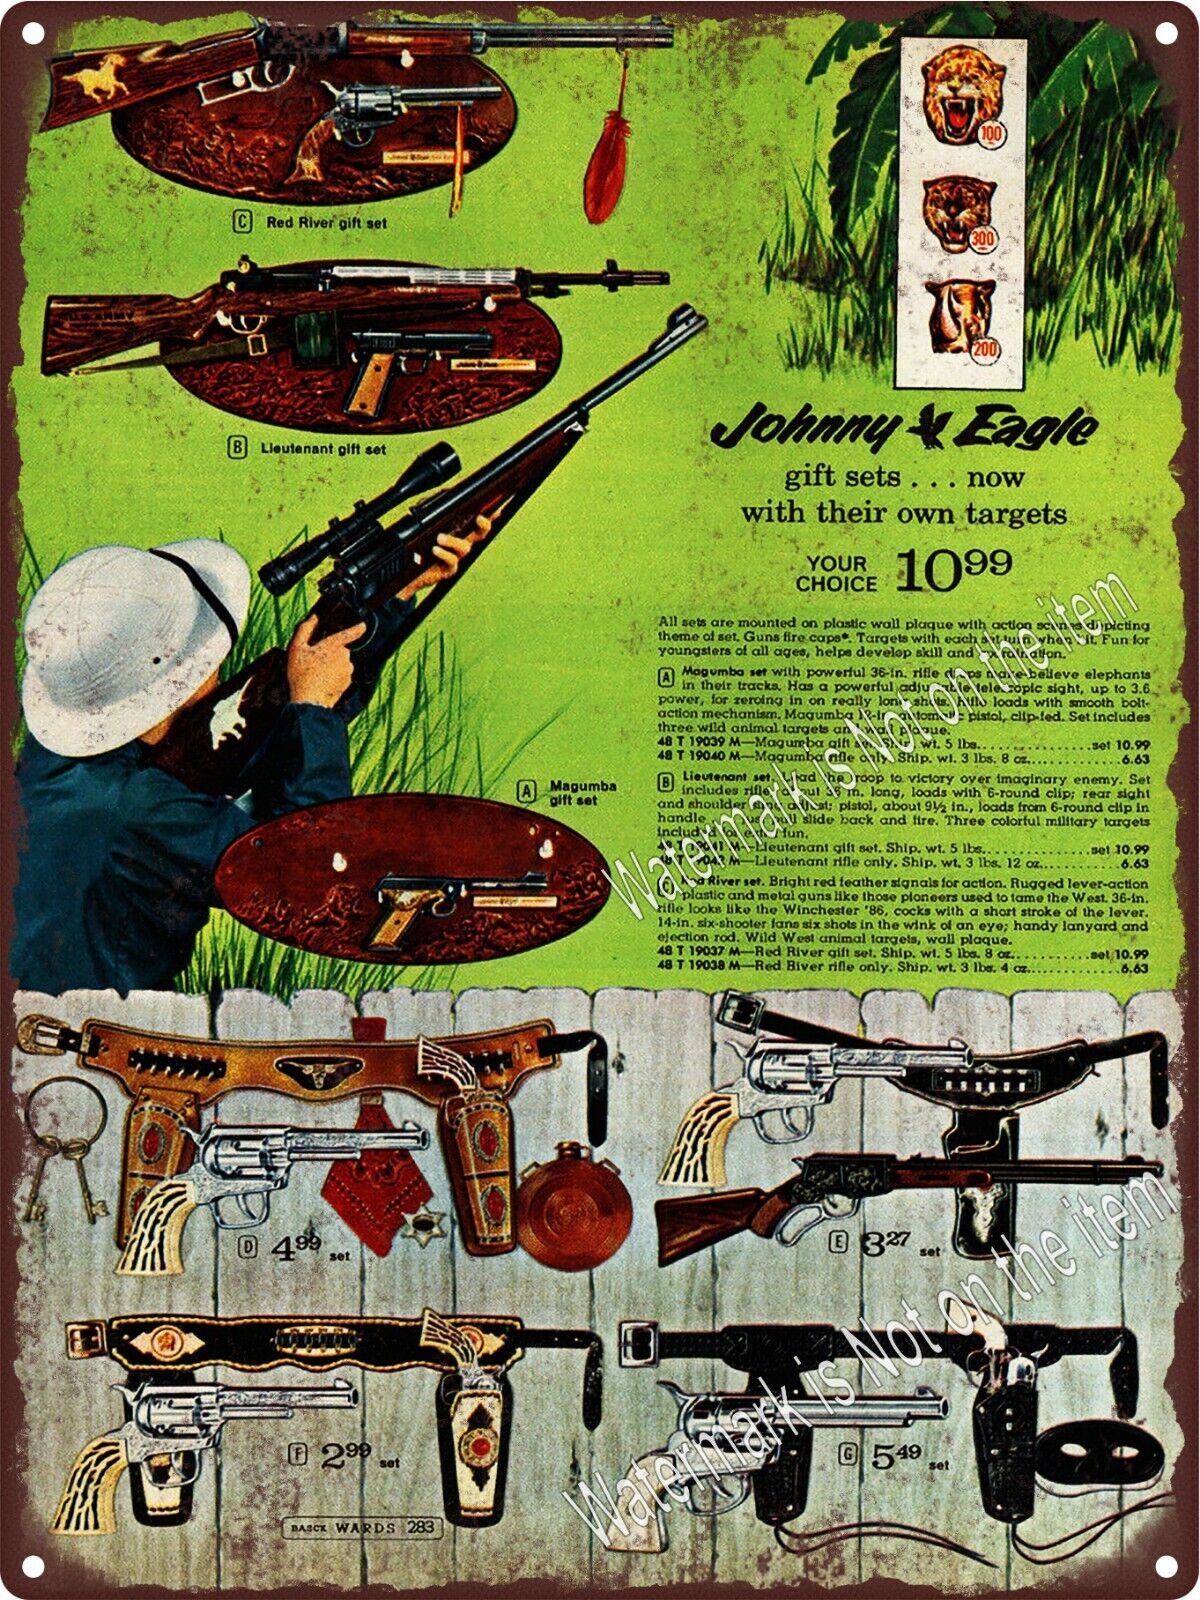 1968 Johnny Eagle Toy Red River Gun Rifle Gift Set Metal Sign 9x12\